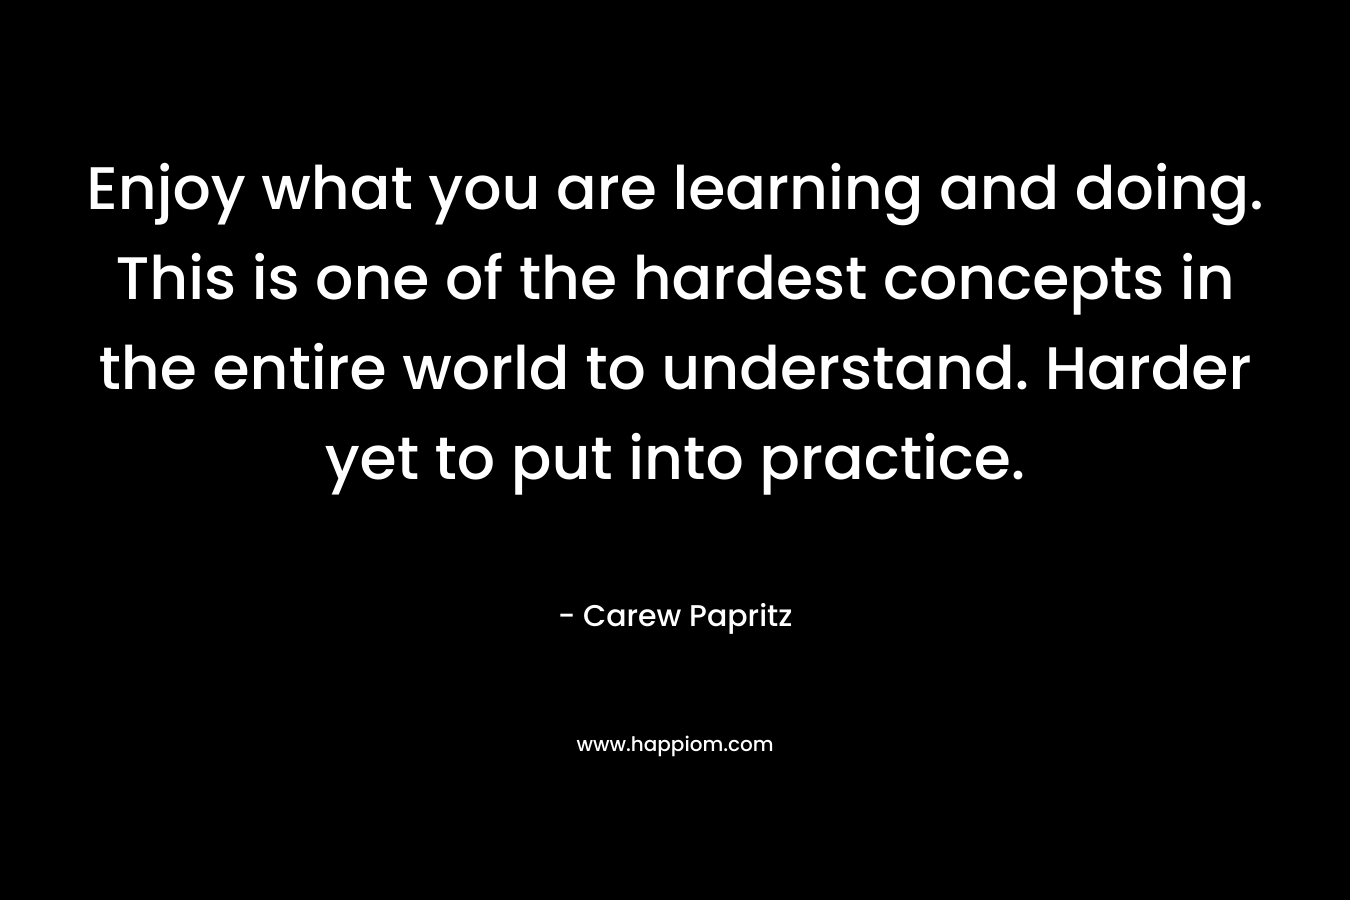 Enjoy what you are learning and doing. This is one of the hardest concepts in the entire world to understand. Harder yet to put into practice.